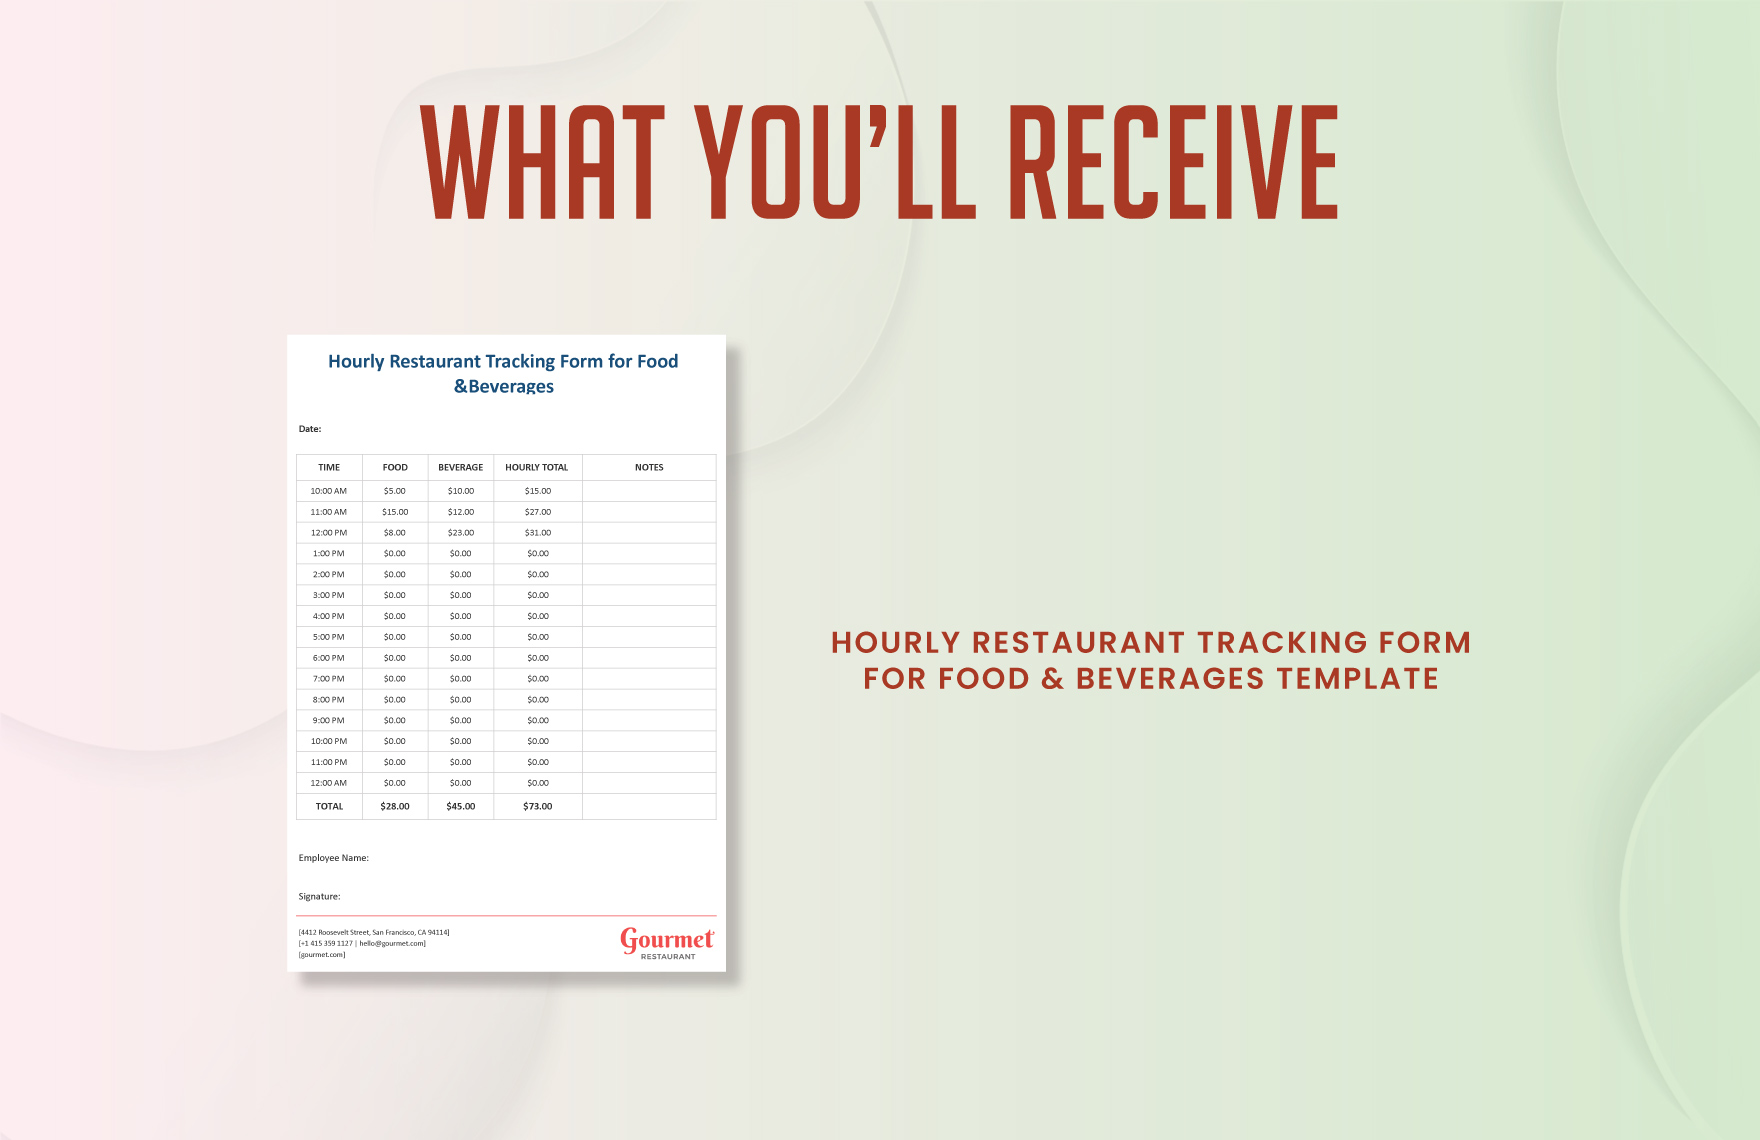 Hourly Restaurant Tracking Form for Food Beverages Instructions